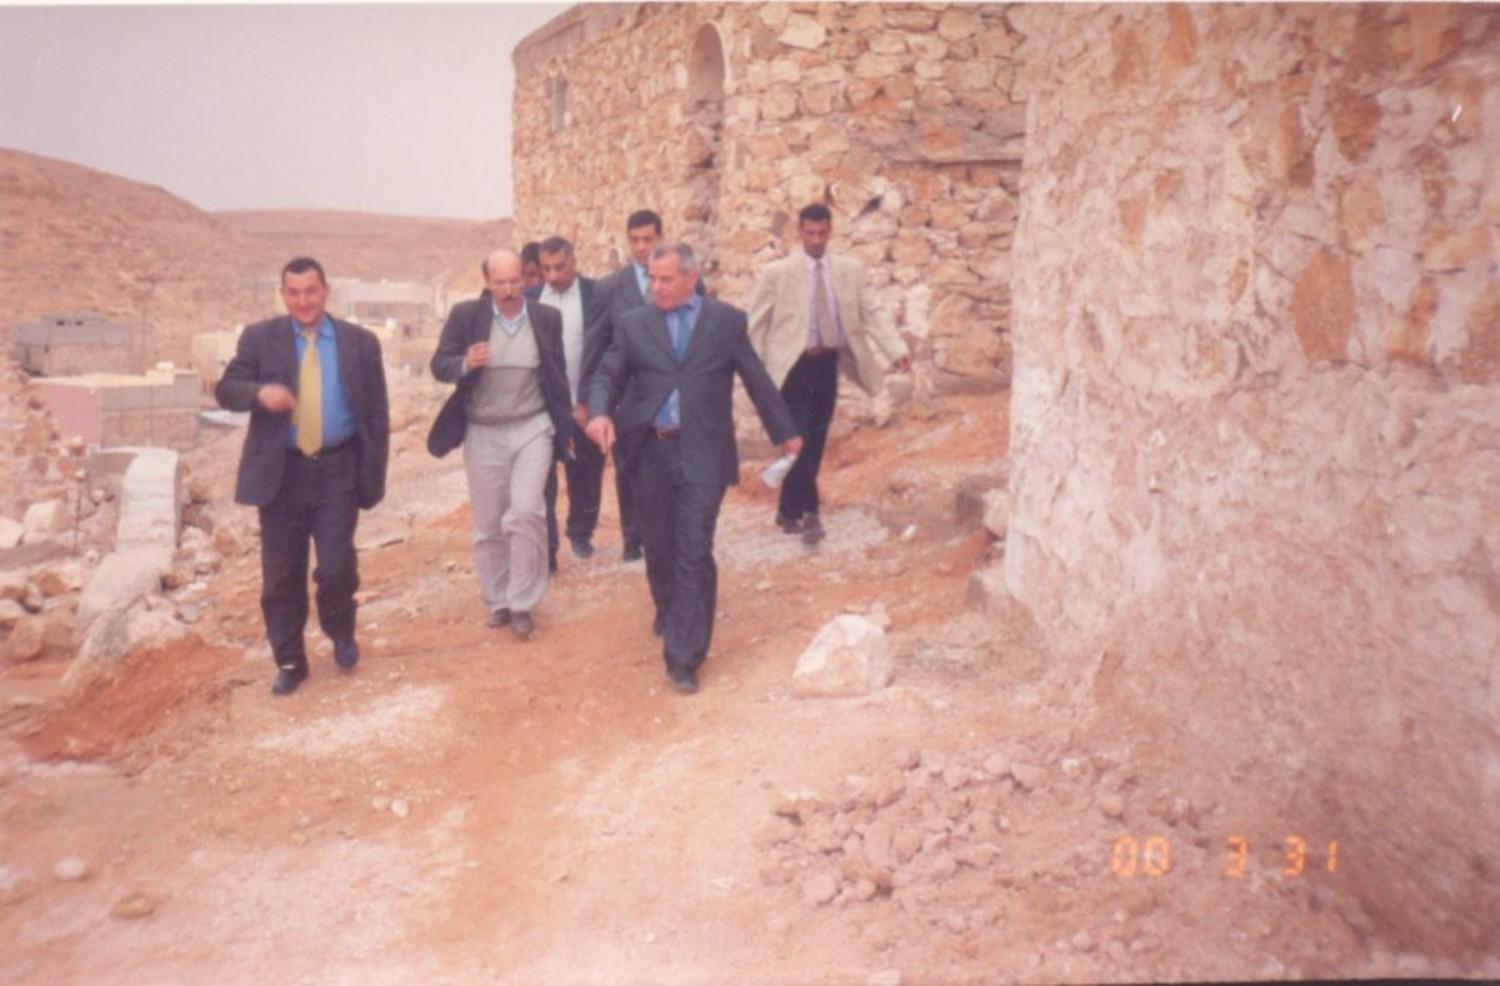 During works - during the visit of the Minister of Finance